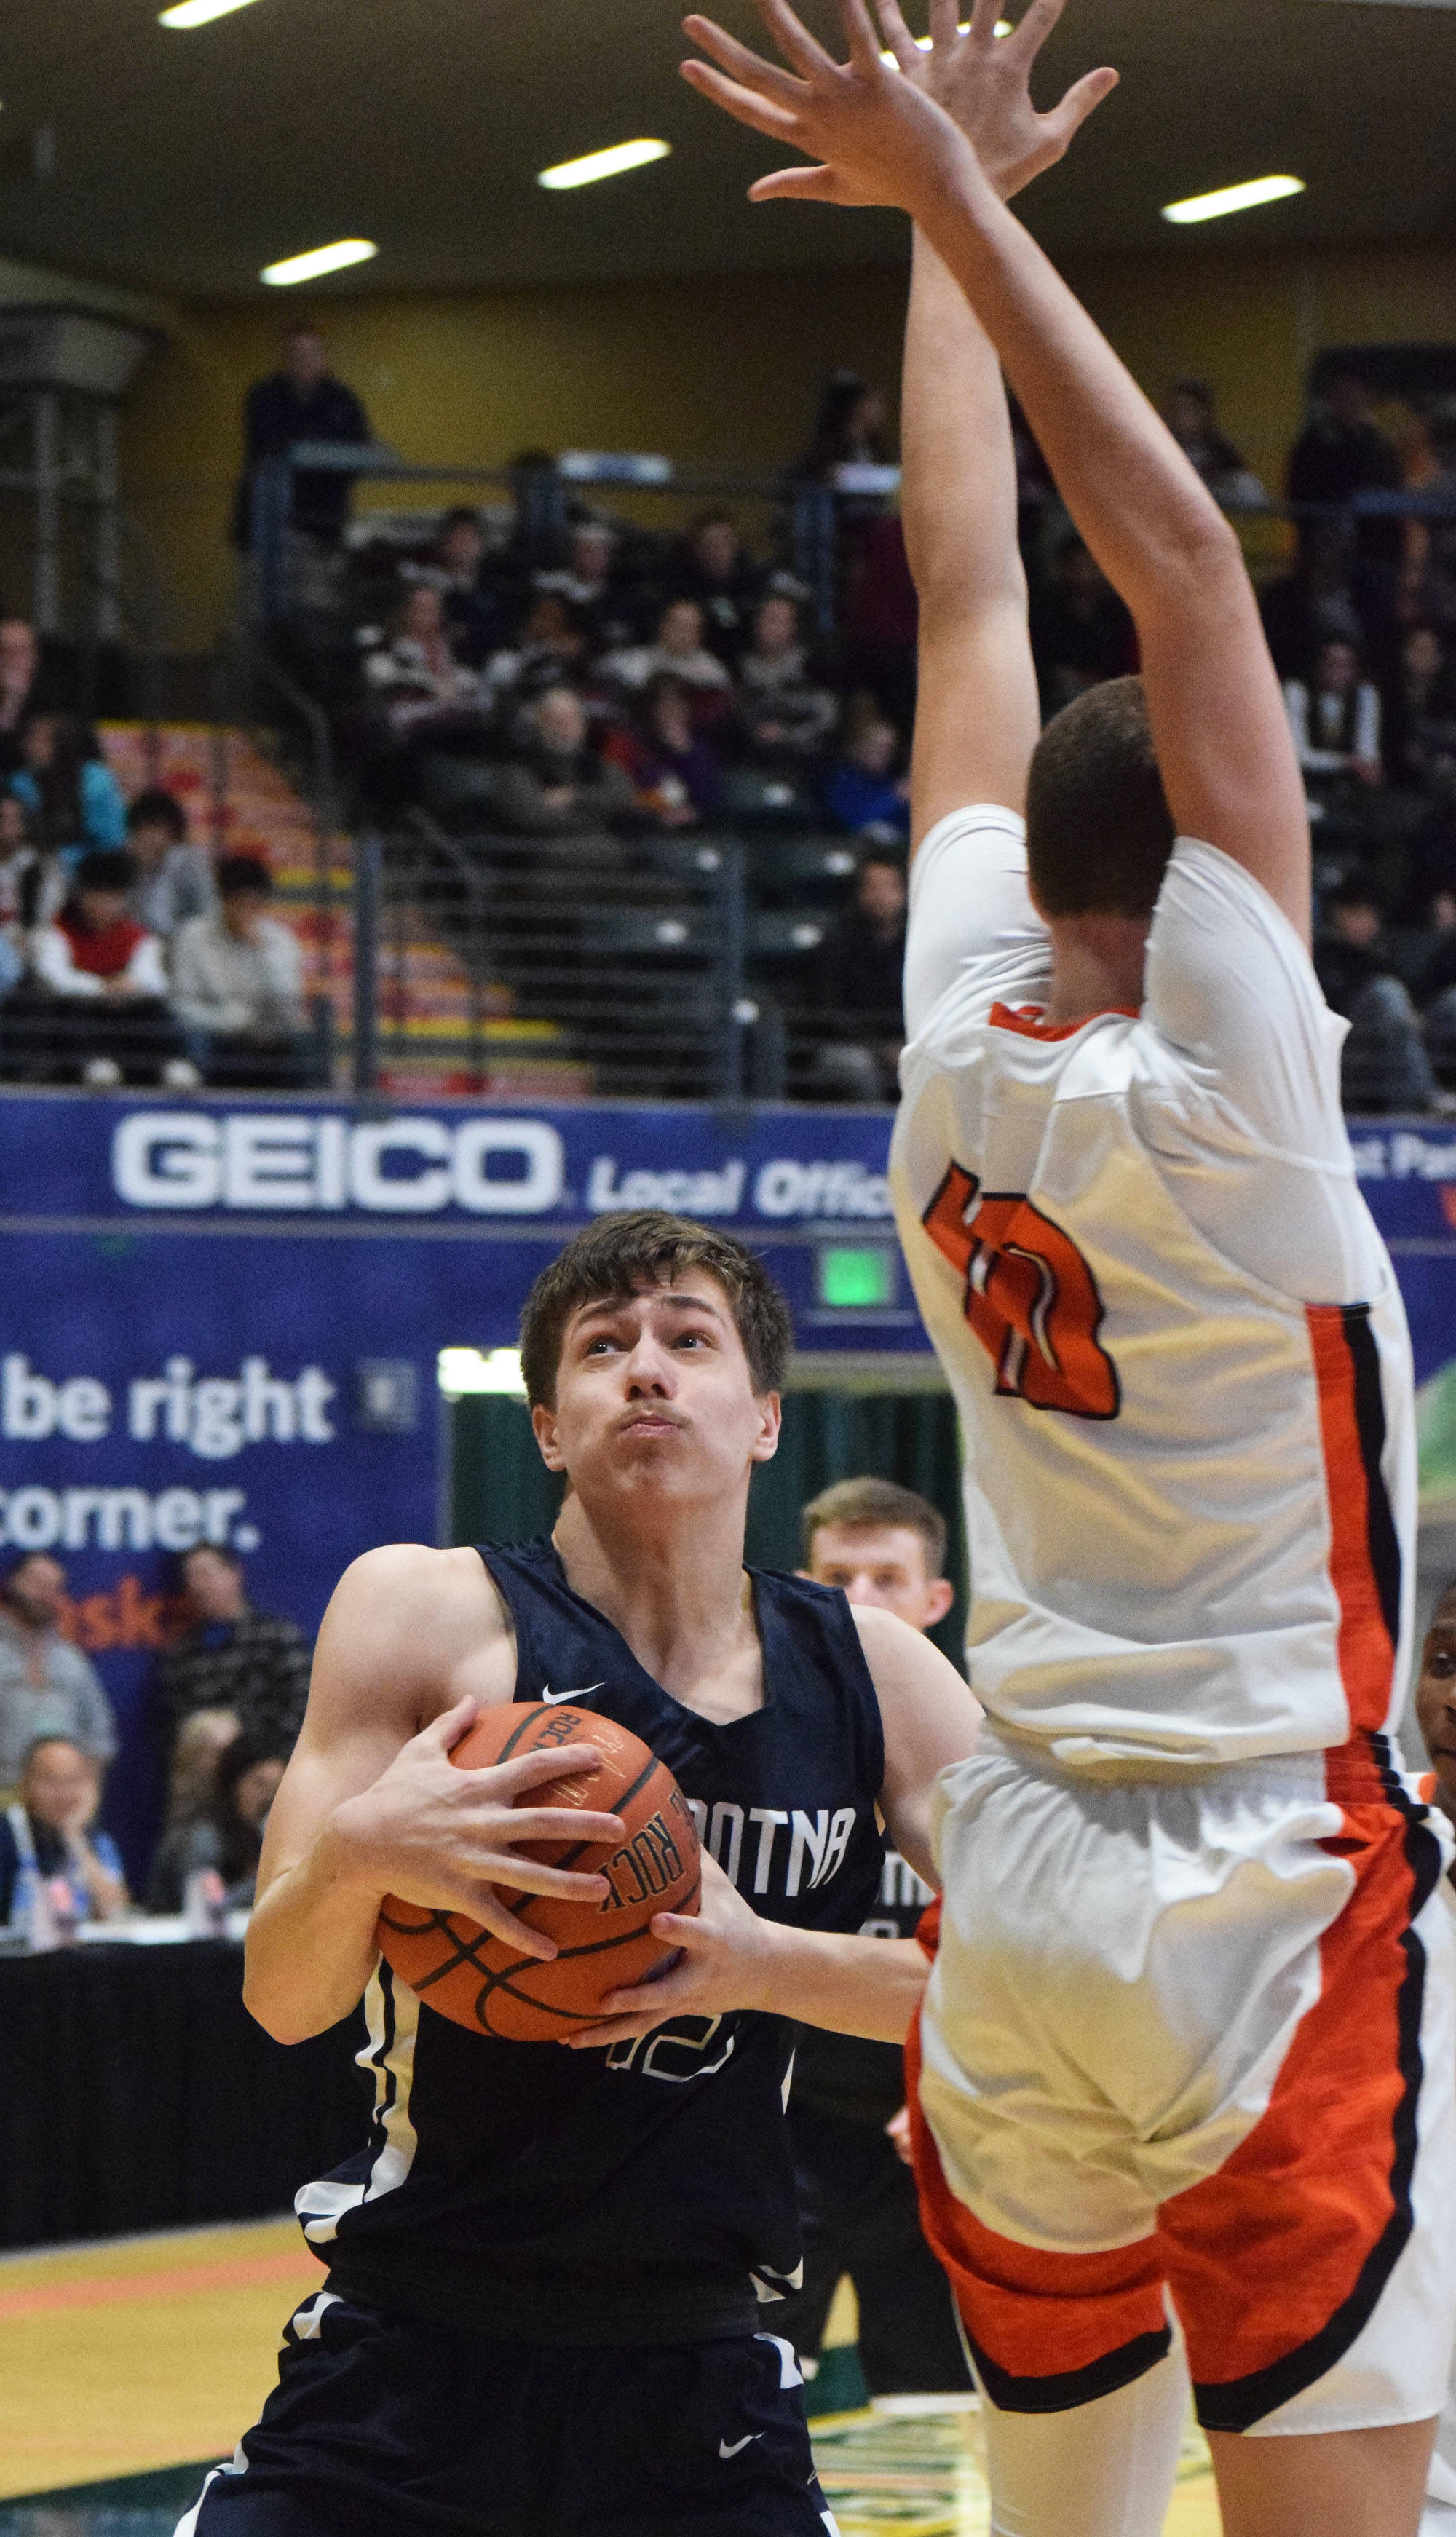 Soldotna’s Jersey Truesdell (left) jukes to the right of West defender Traivar Jackson, Thursday, Mar. 21, 2019, at the Class 4A state championship tournament at the Alaska Airlines Center in Anchorage. (Photo by Joey Klecka/Peninsula Clarion)